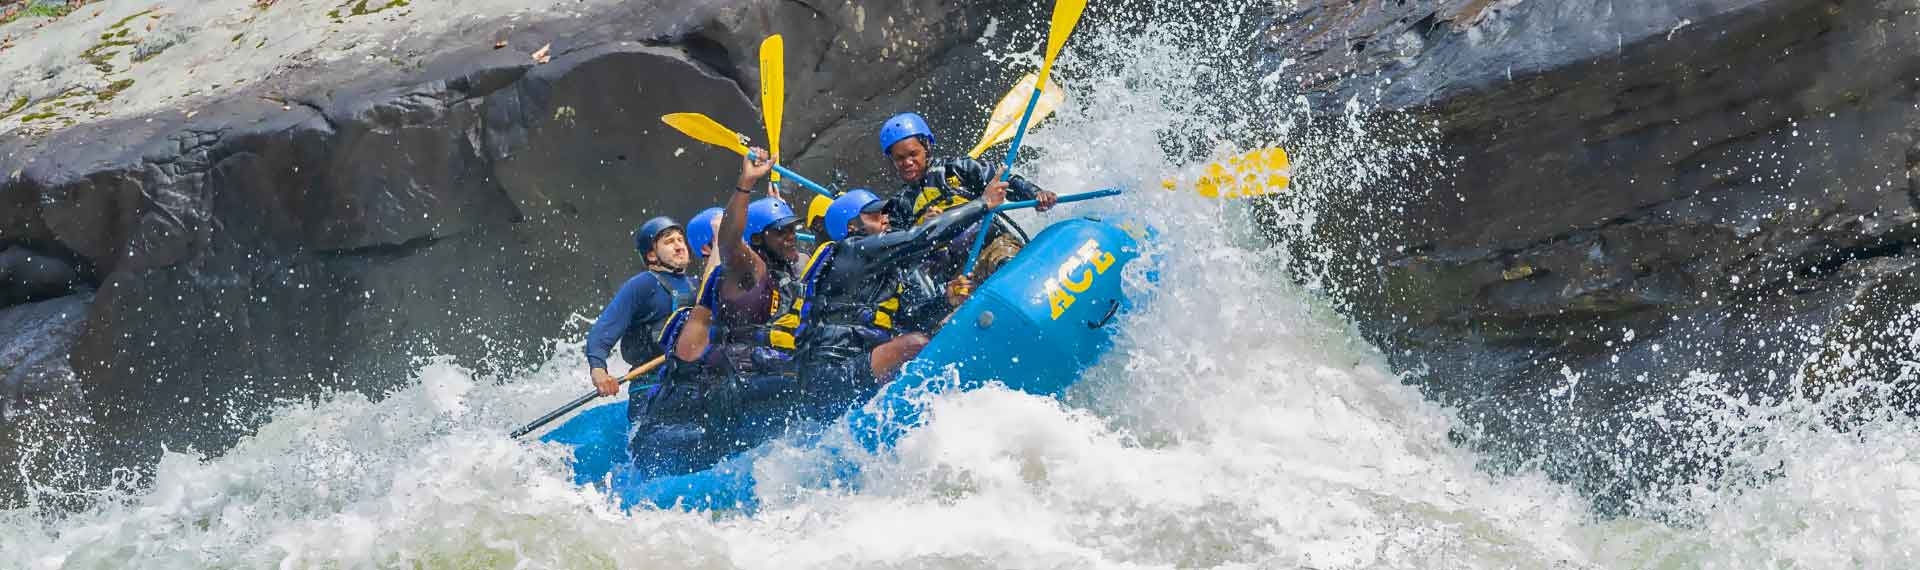 Rafters take on pillow rock rapid on the Upper Gauley River in West Virginia on a guided whitewater rafting trip with ACE Adventure Resort.